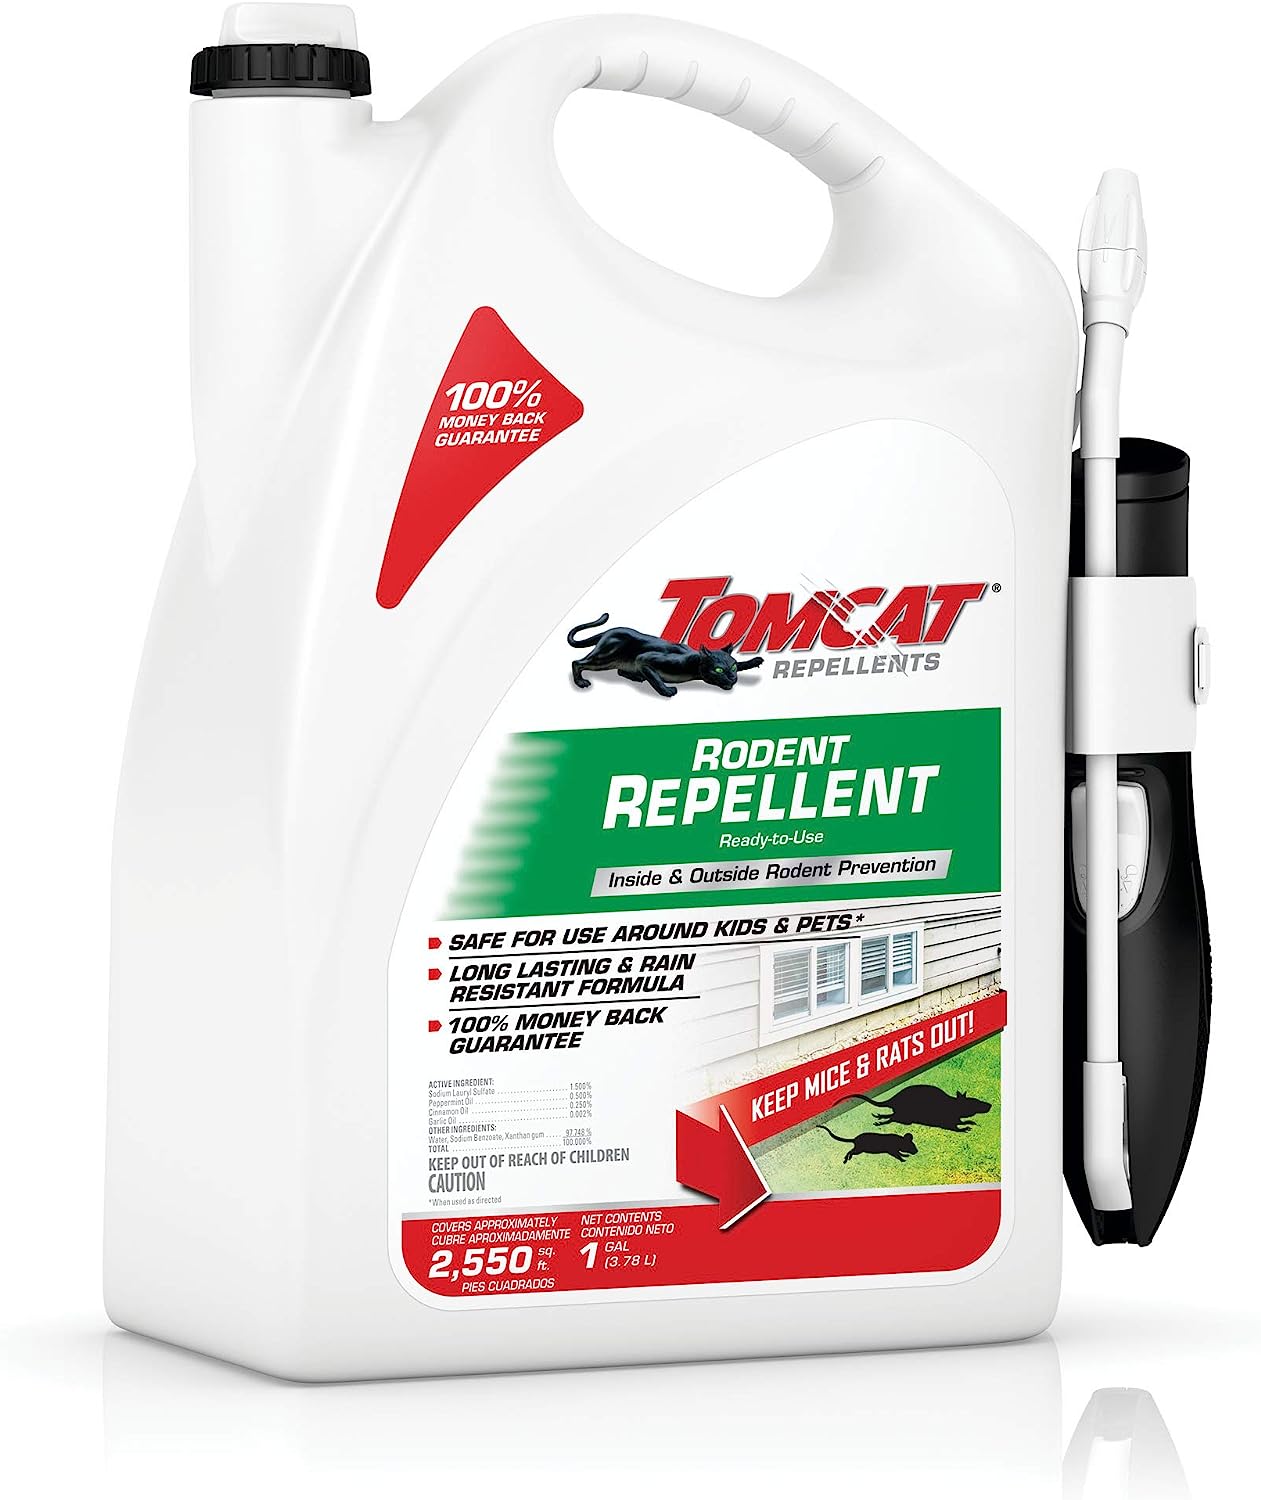 rat repellent spray product review